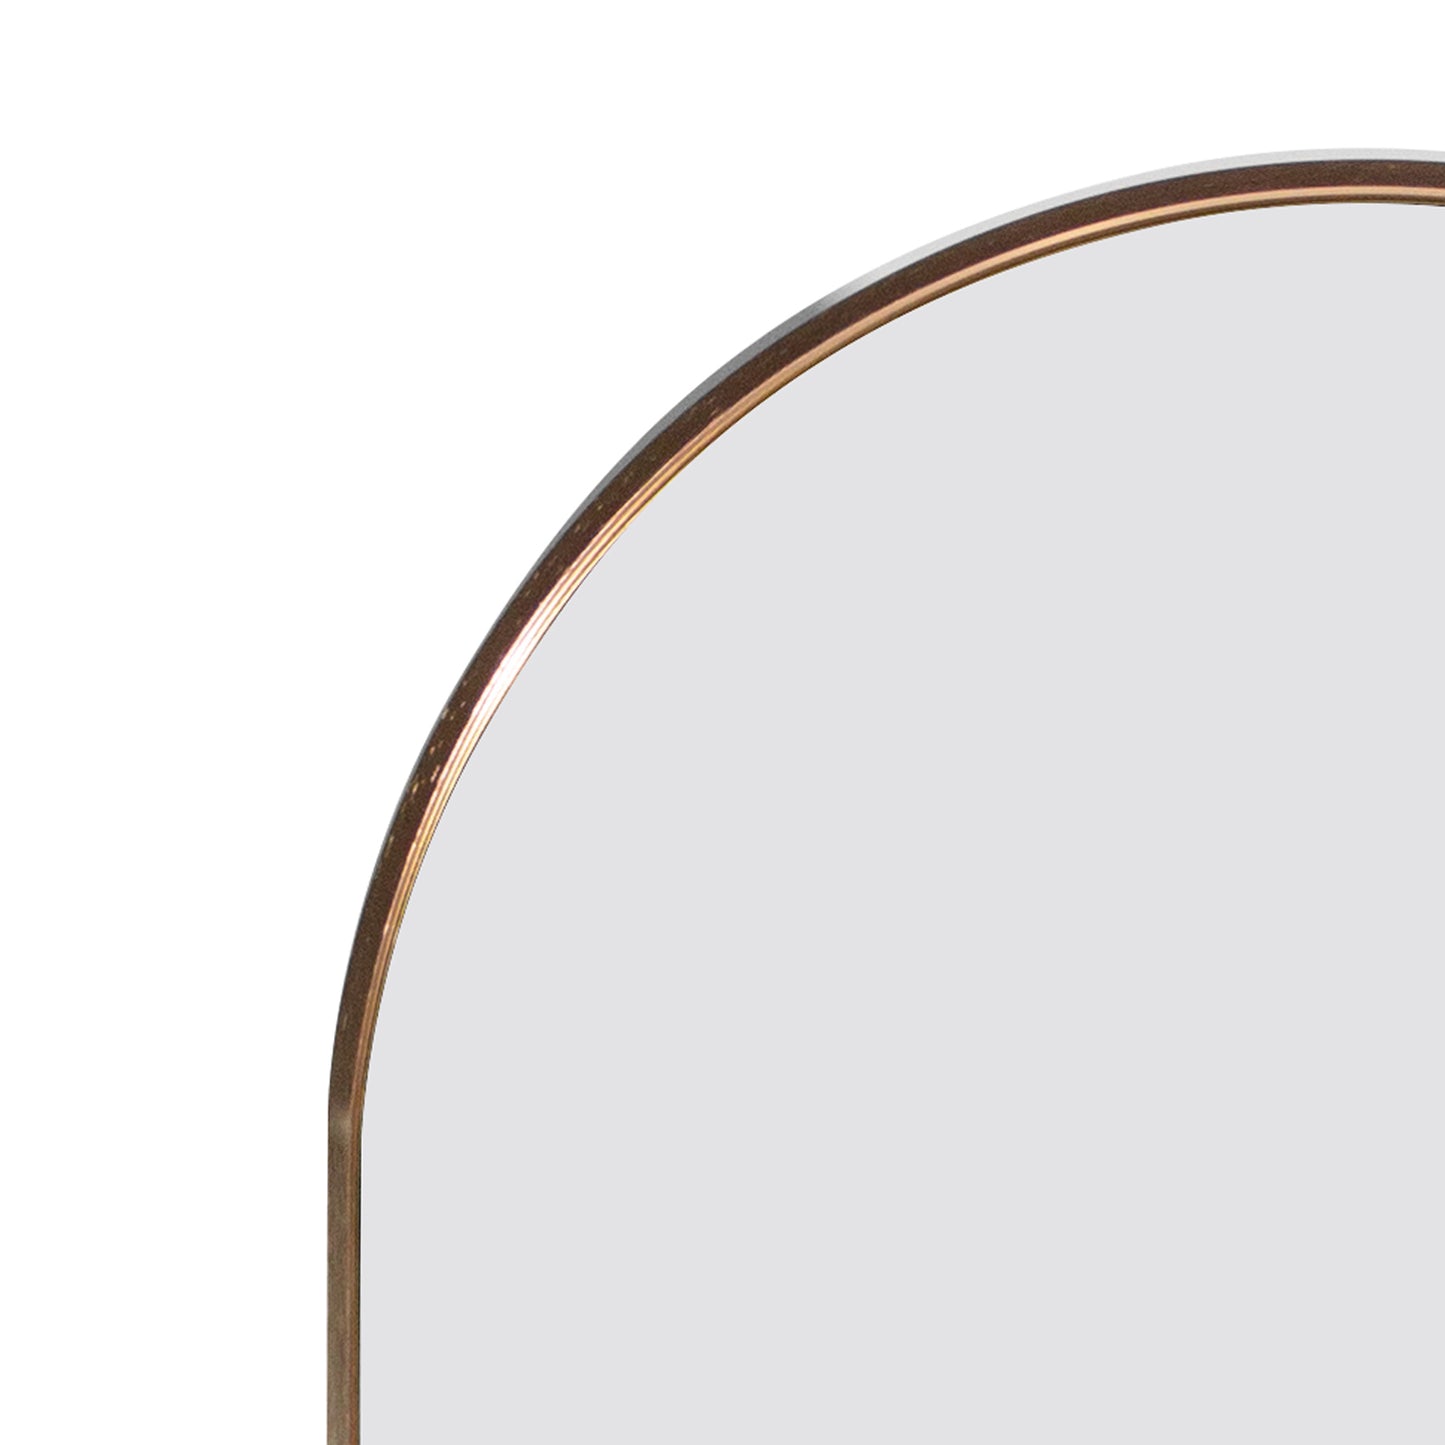 Full Length Wall Mirror - 65” x 22” Arched Free Standing Body Mirror , Black Metal Framed Large Floor Mirror for Bedroom, Modern   Stand Up / Leaning Mirror